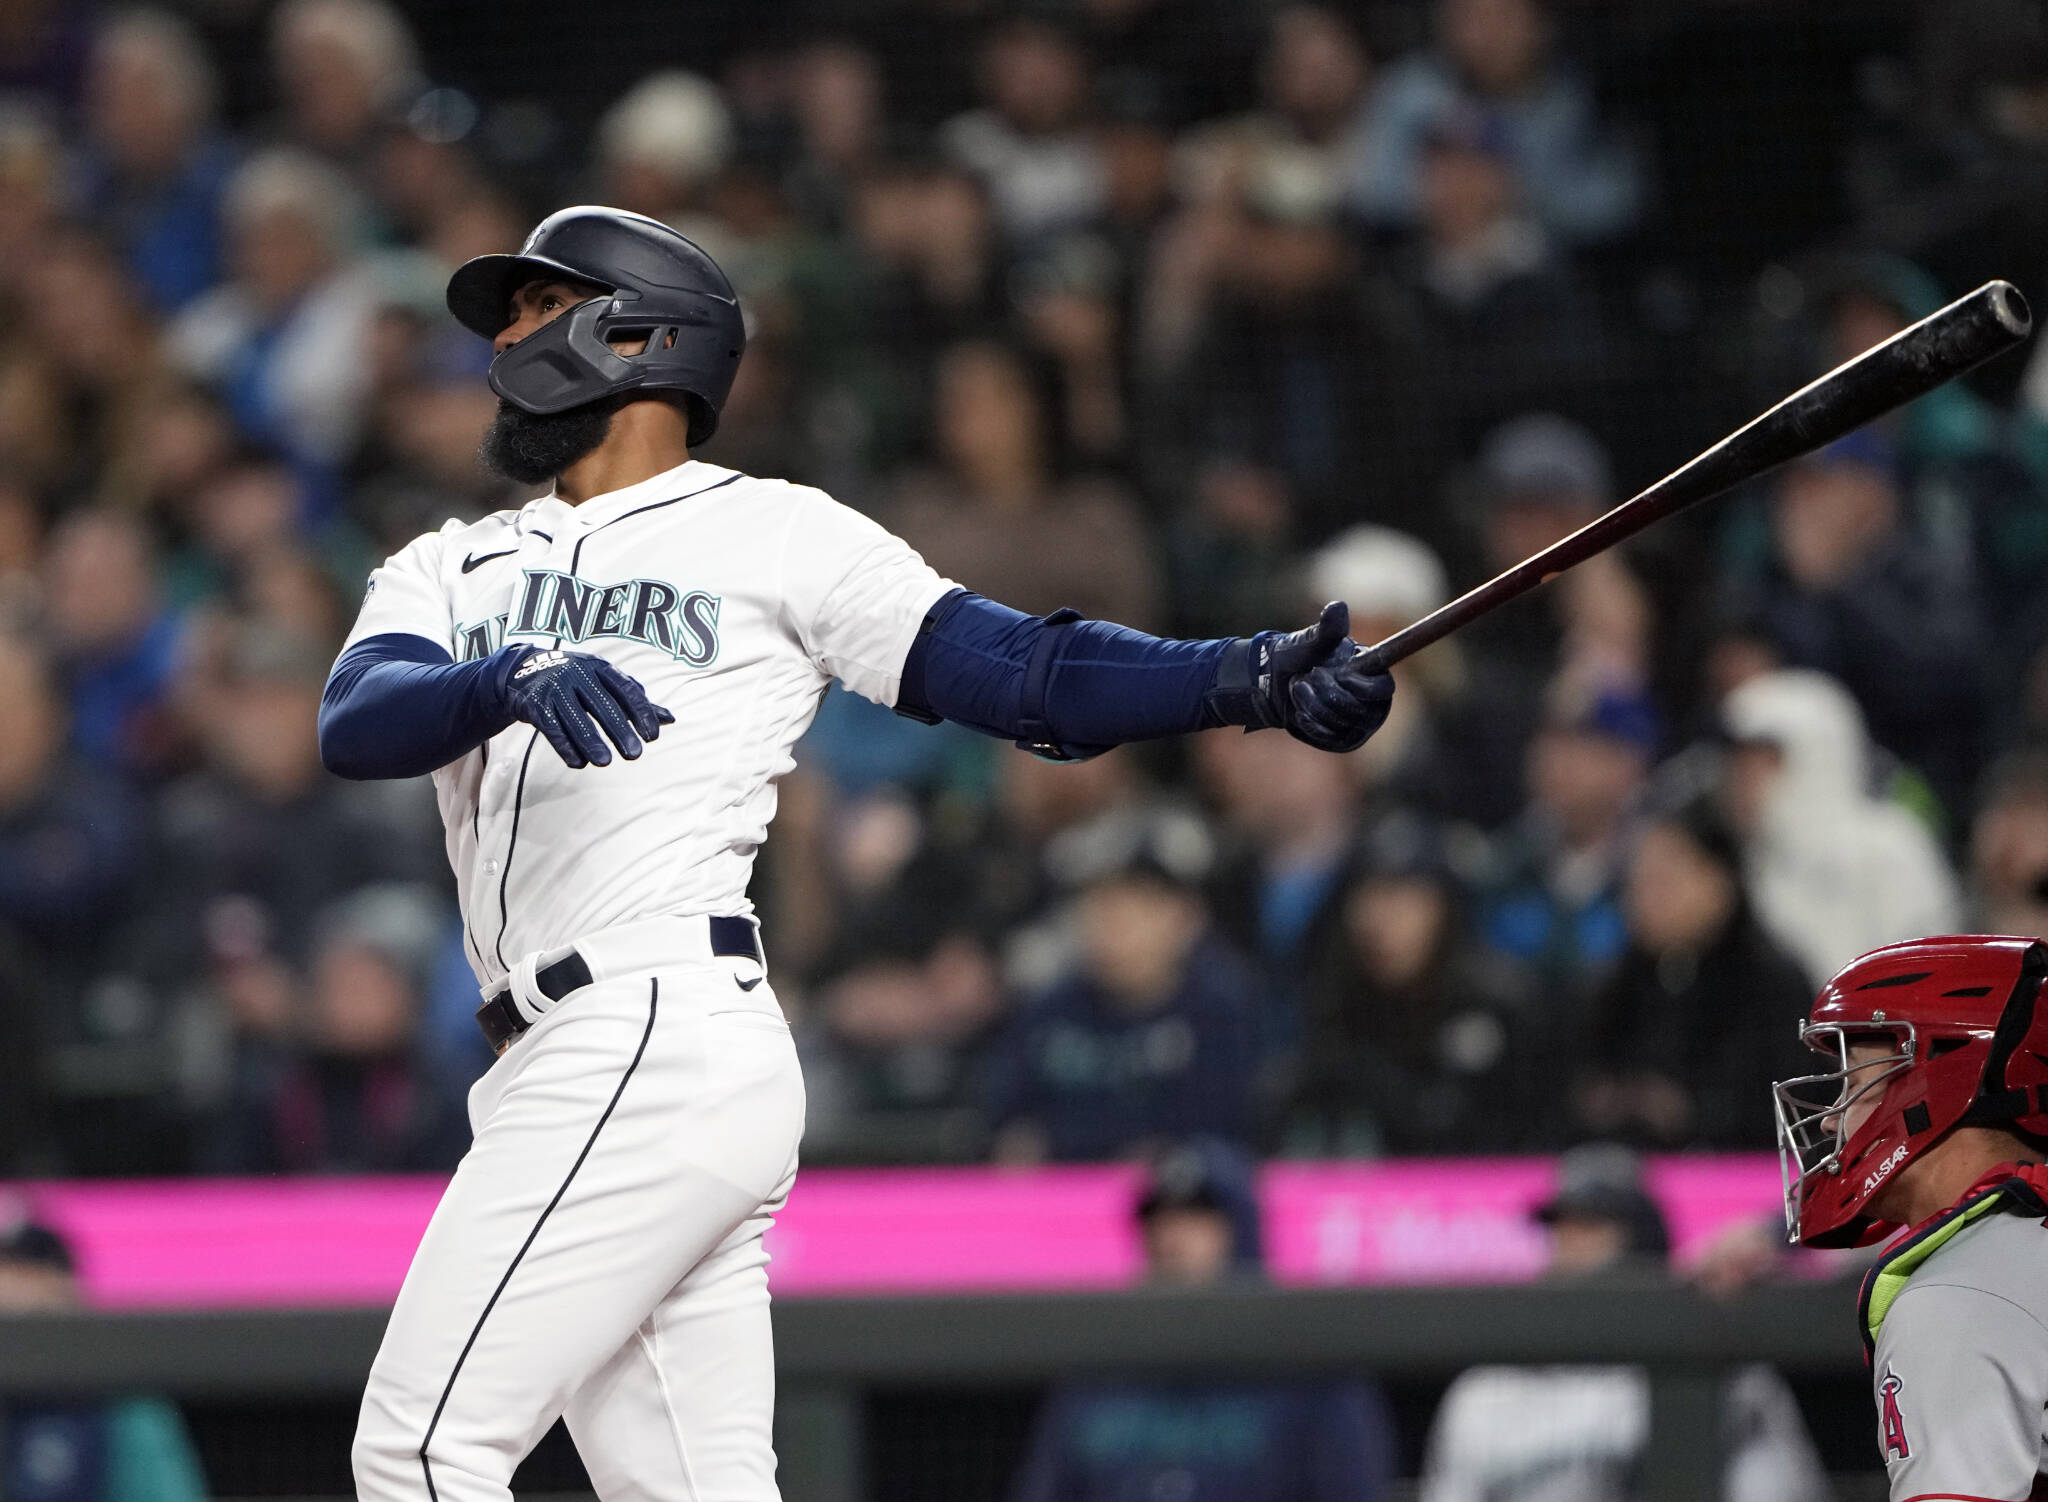 Seattle Mariners’ Teoscar Hernandez follows through on a three-run home run, his second home run of the game, against the Los Angeles Angels during the fifth inning Tuesday in Seattle. (AP Photo/Lindsey Wasson)